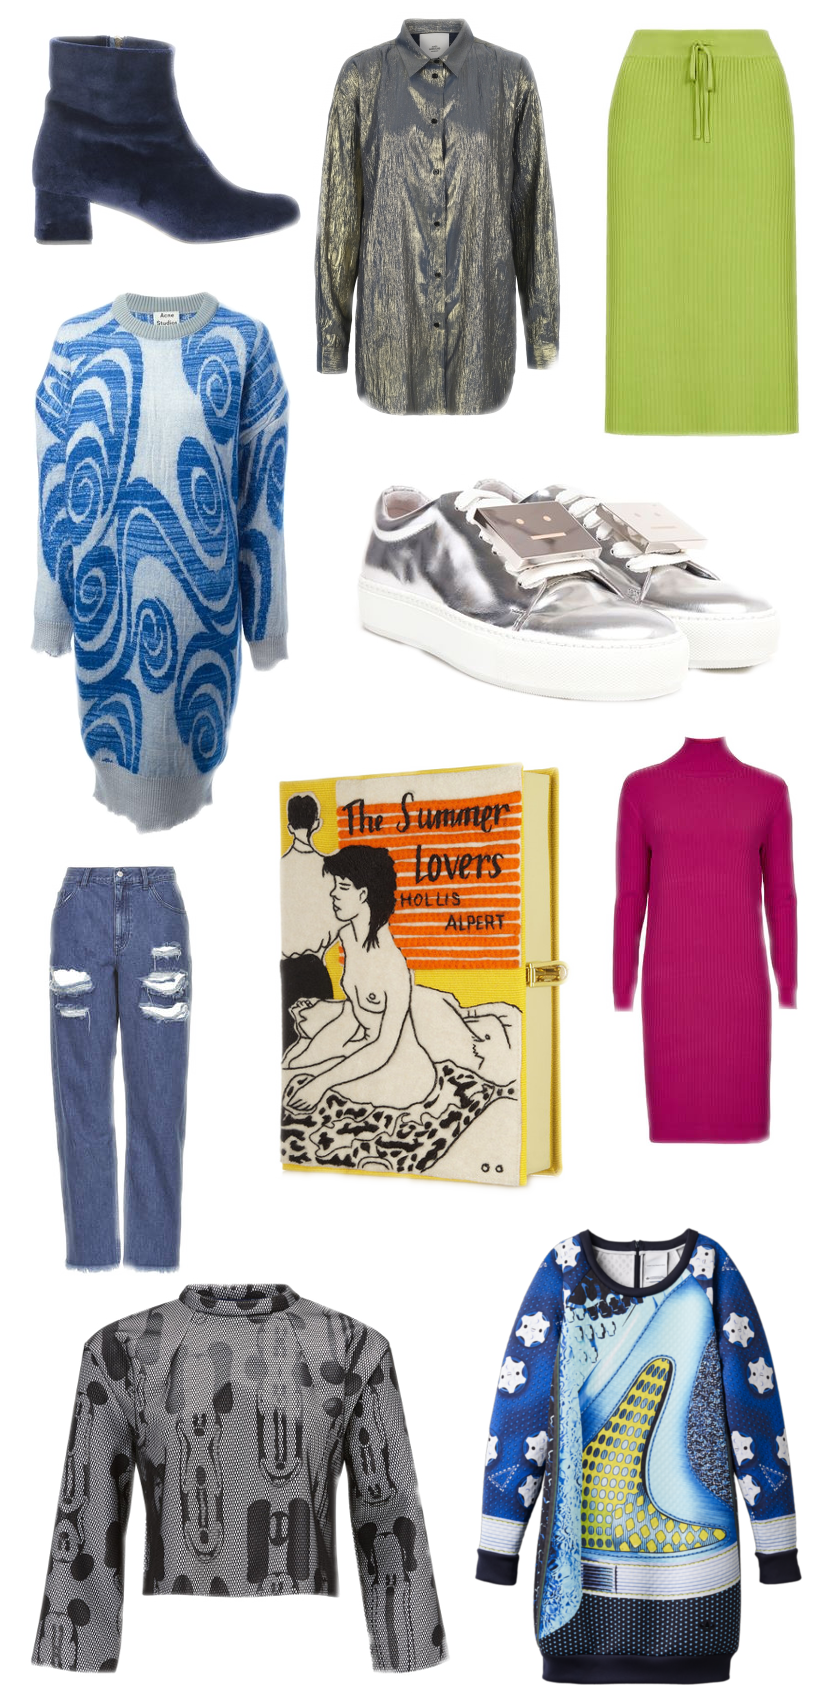 nemesis babe expensive christmas wishes wood wood acne studios topshop ganni mads norgaard